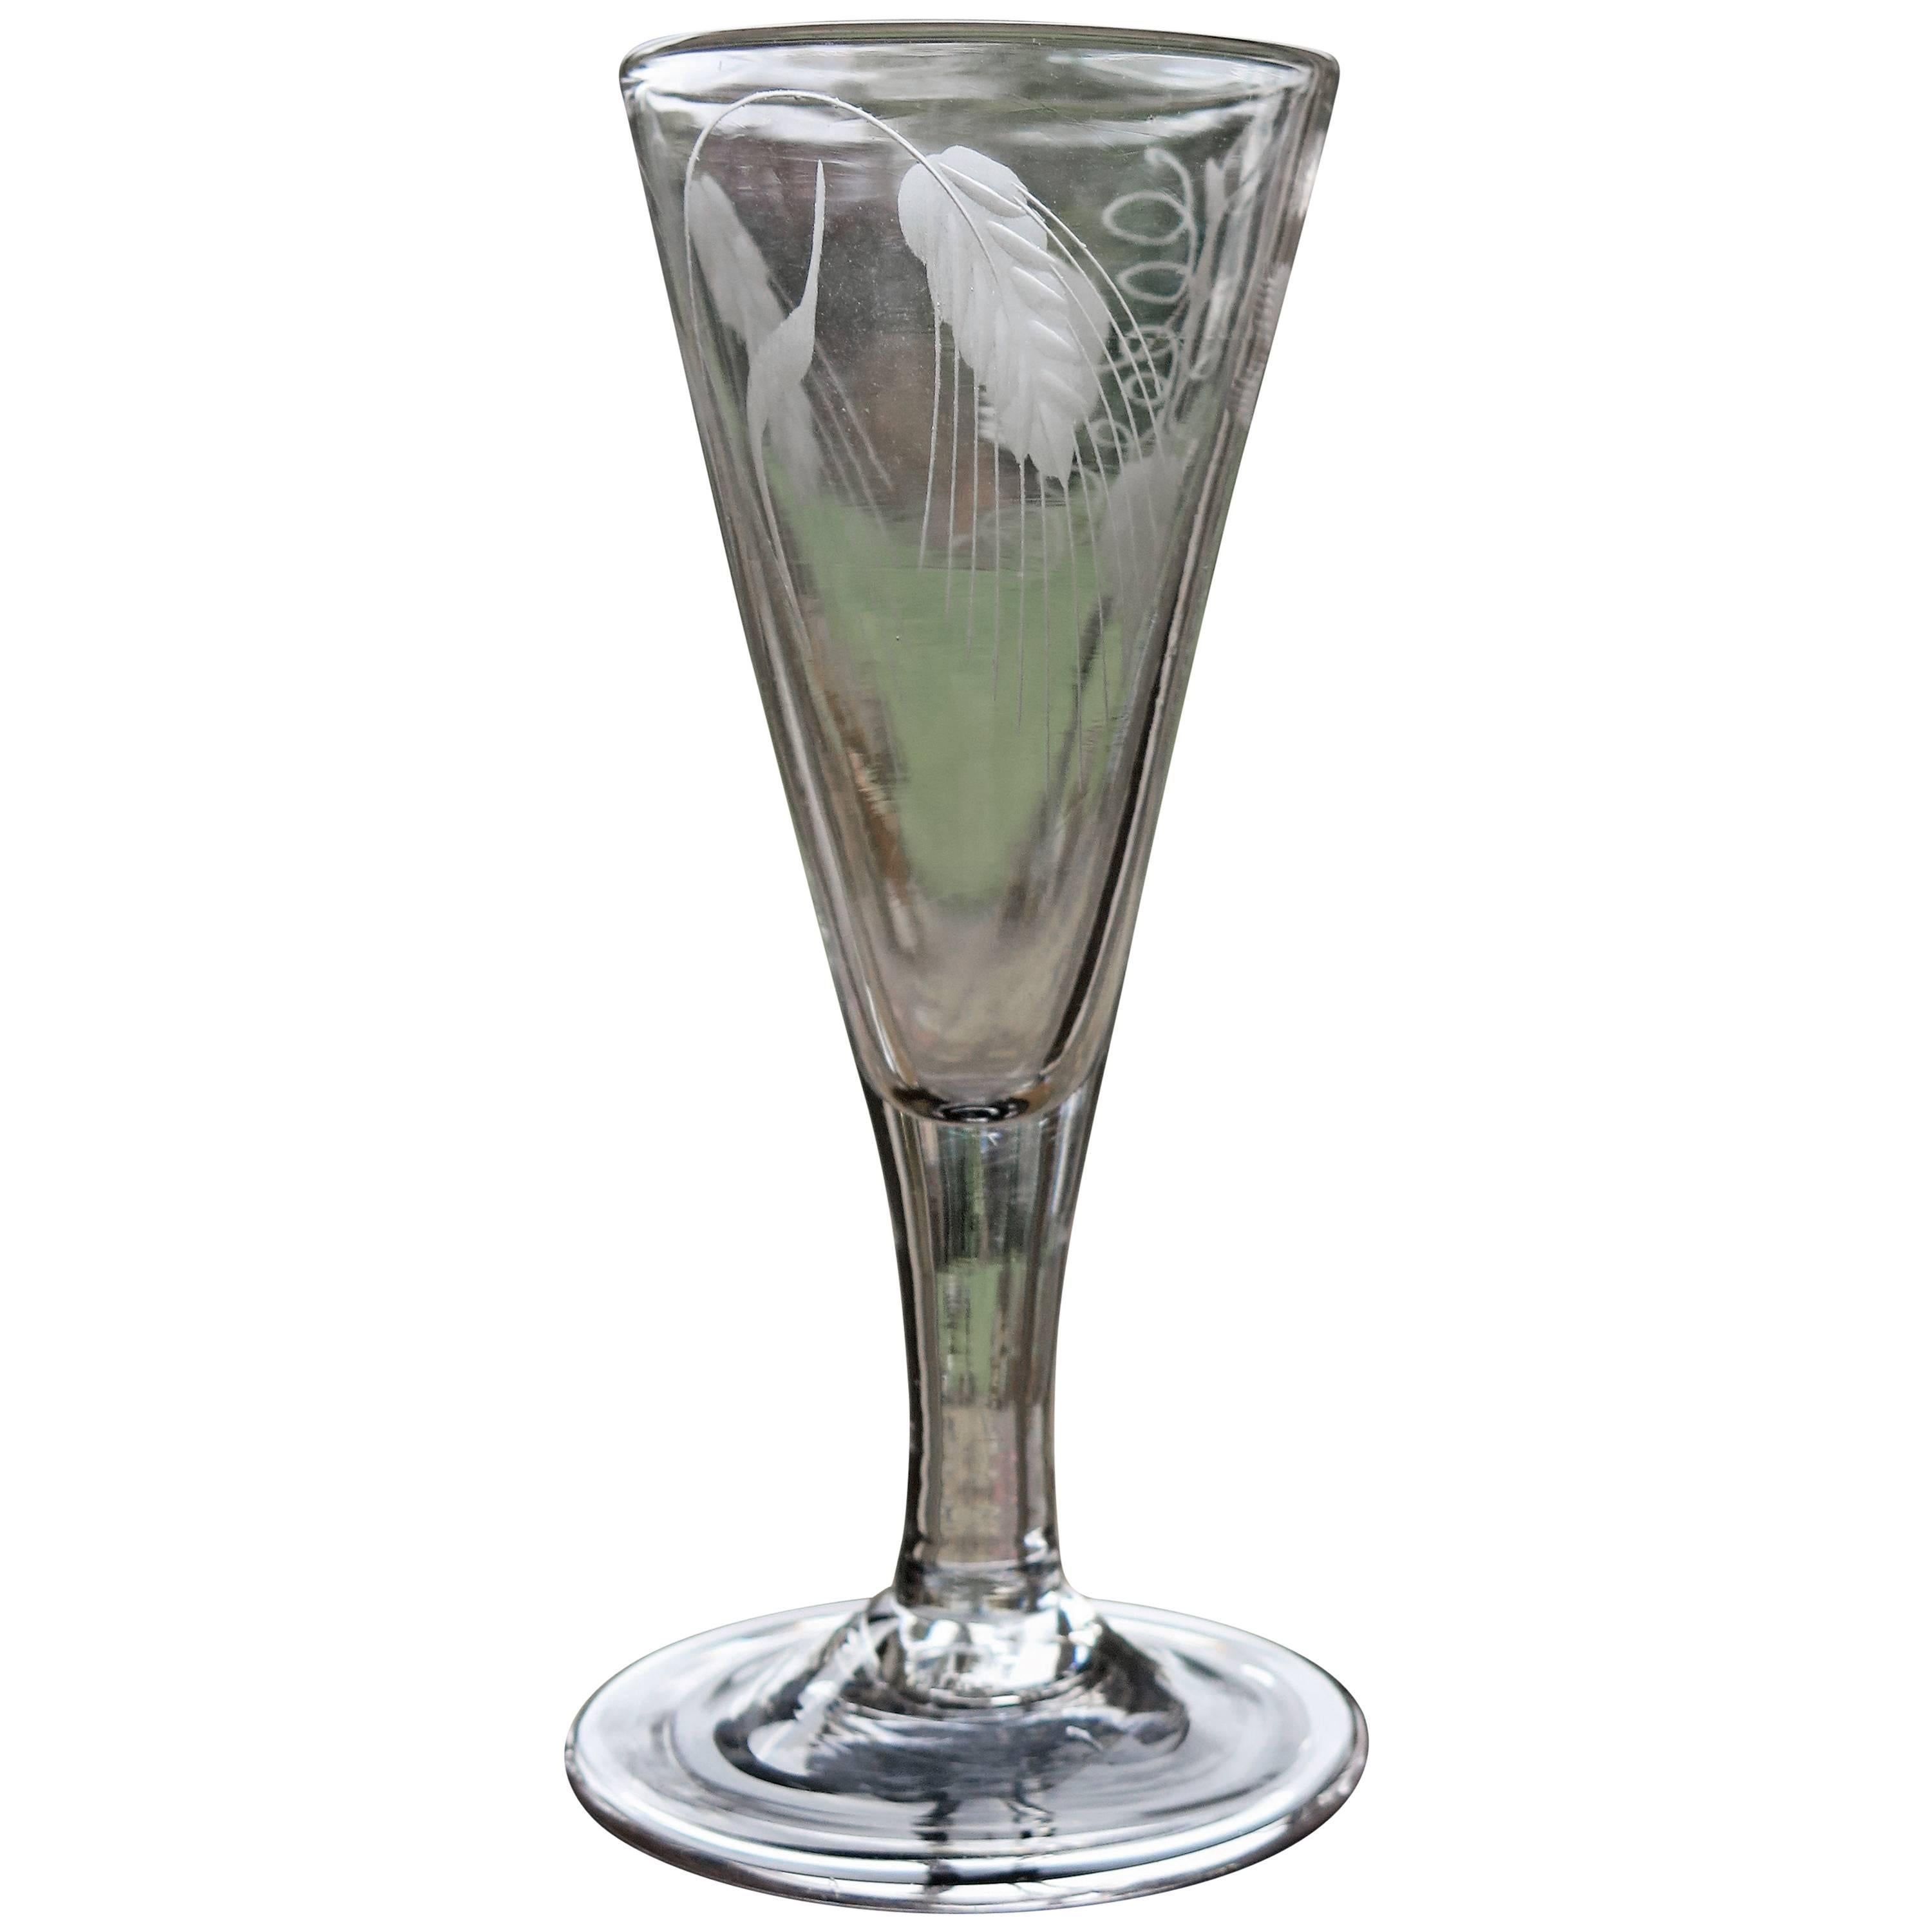 Mid-Georgian Ale Drinking Glass Handblown Engraved with Hops and Barley, Ca 1750